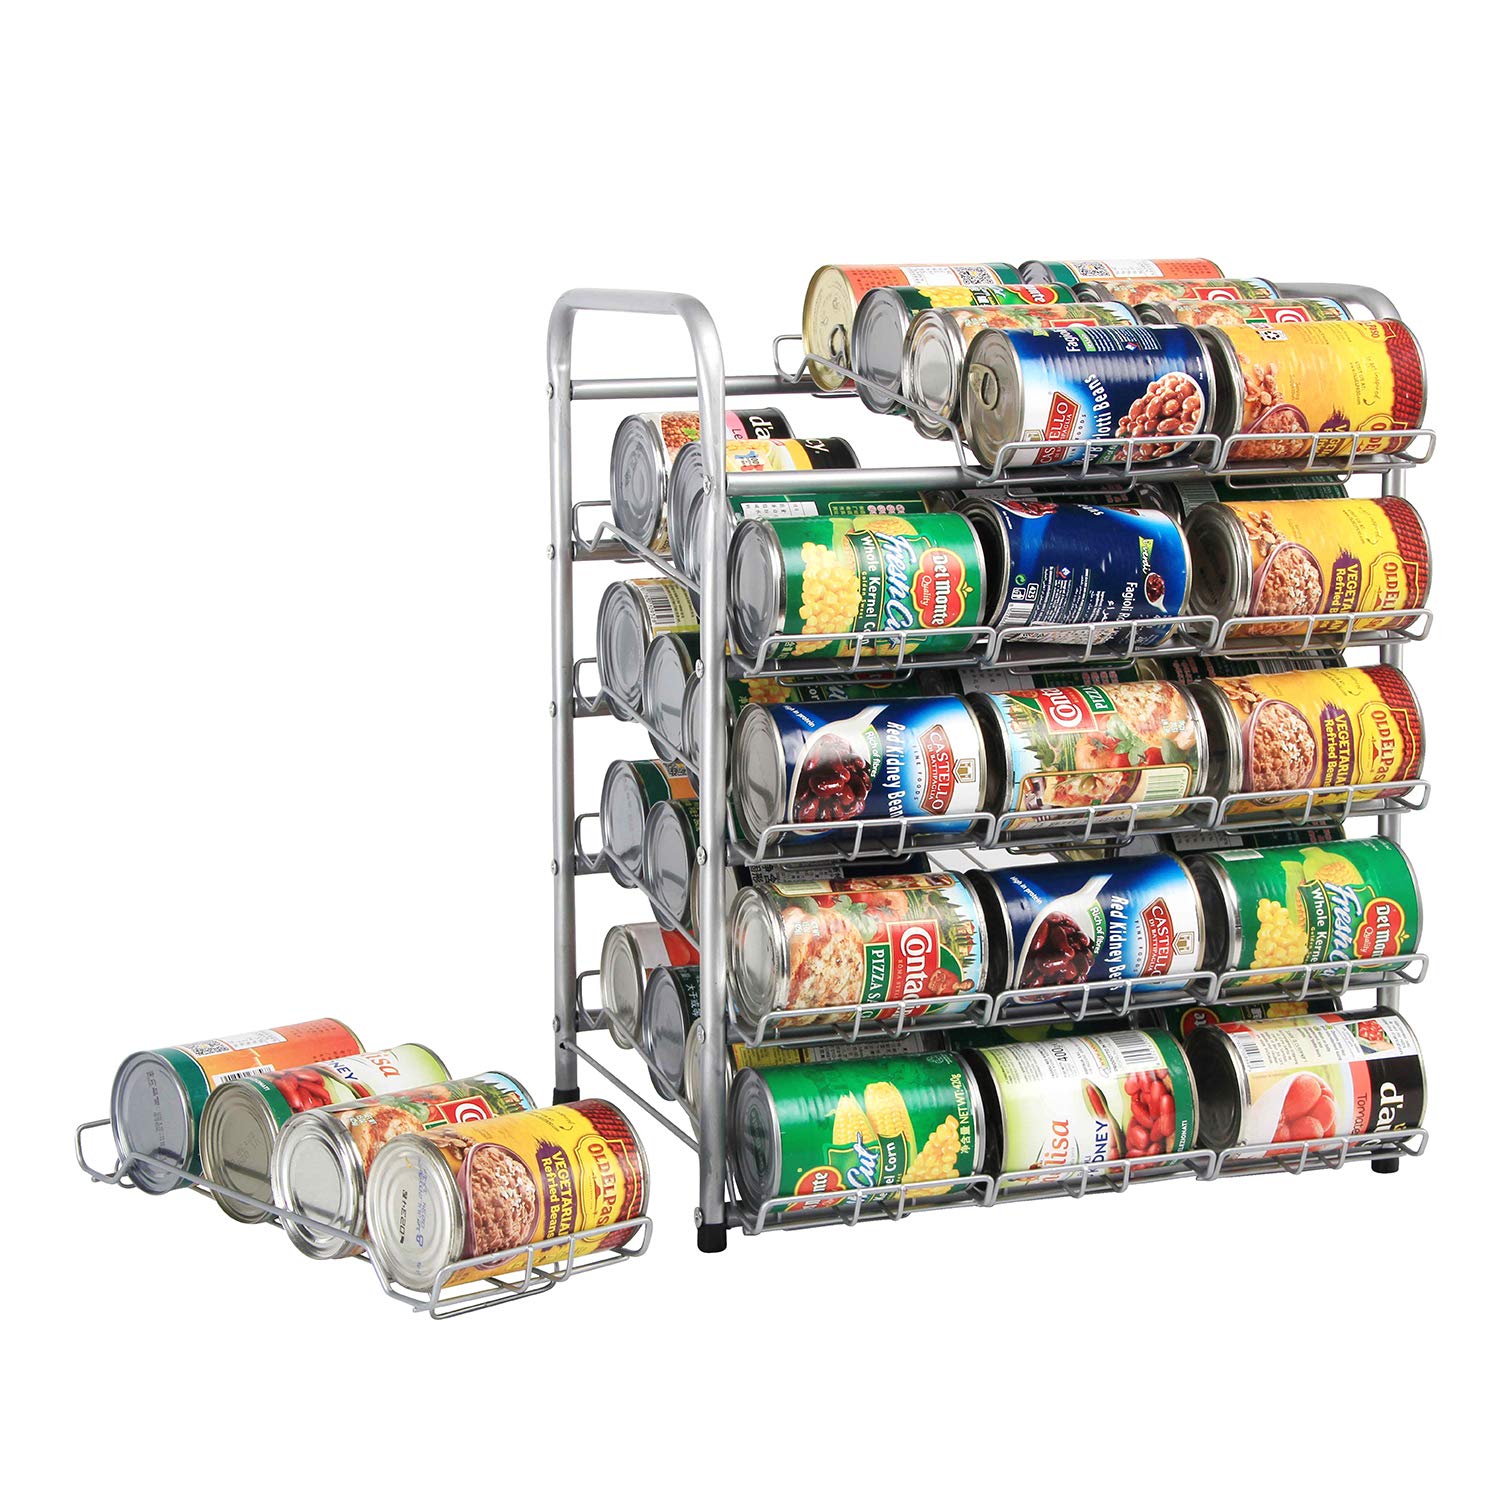 Rice rat Can Organizer for Pantry, Can Rack Can Storage Dispenser for Canned Food (5 tiers)